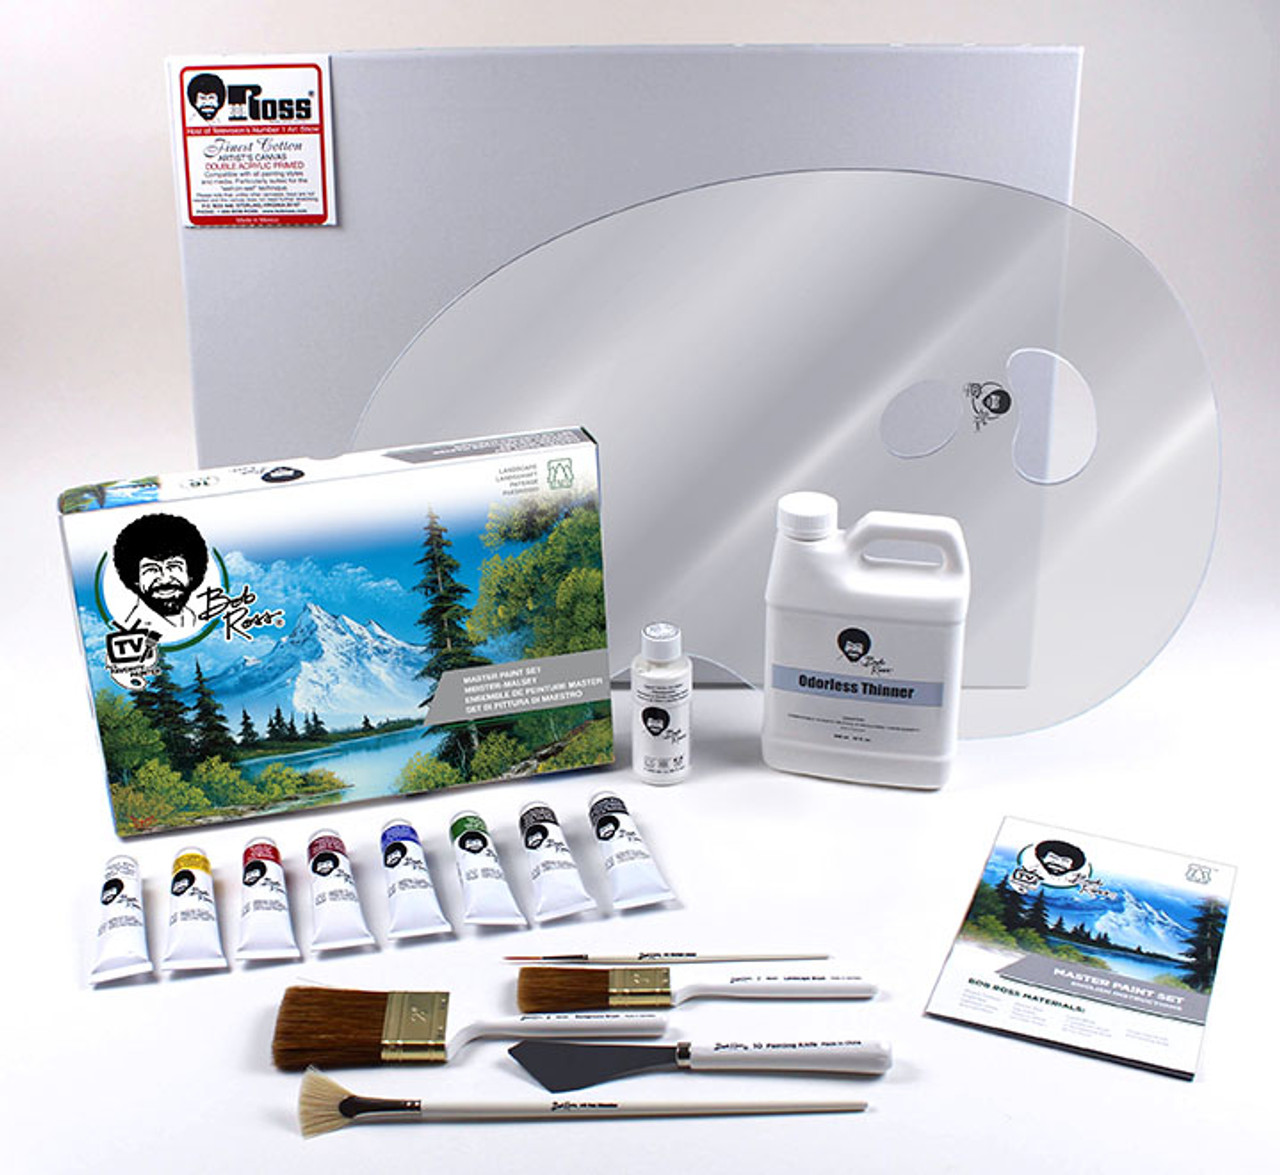 Bob Ross Master Paint Set with Extras